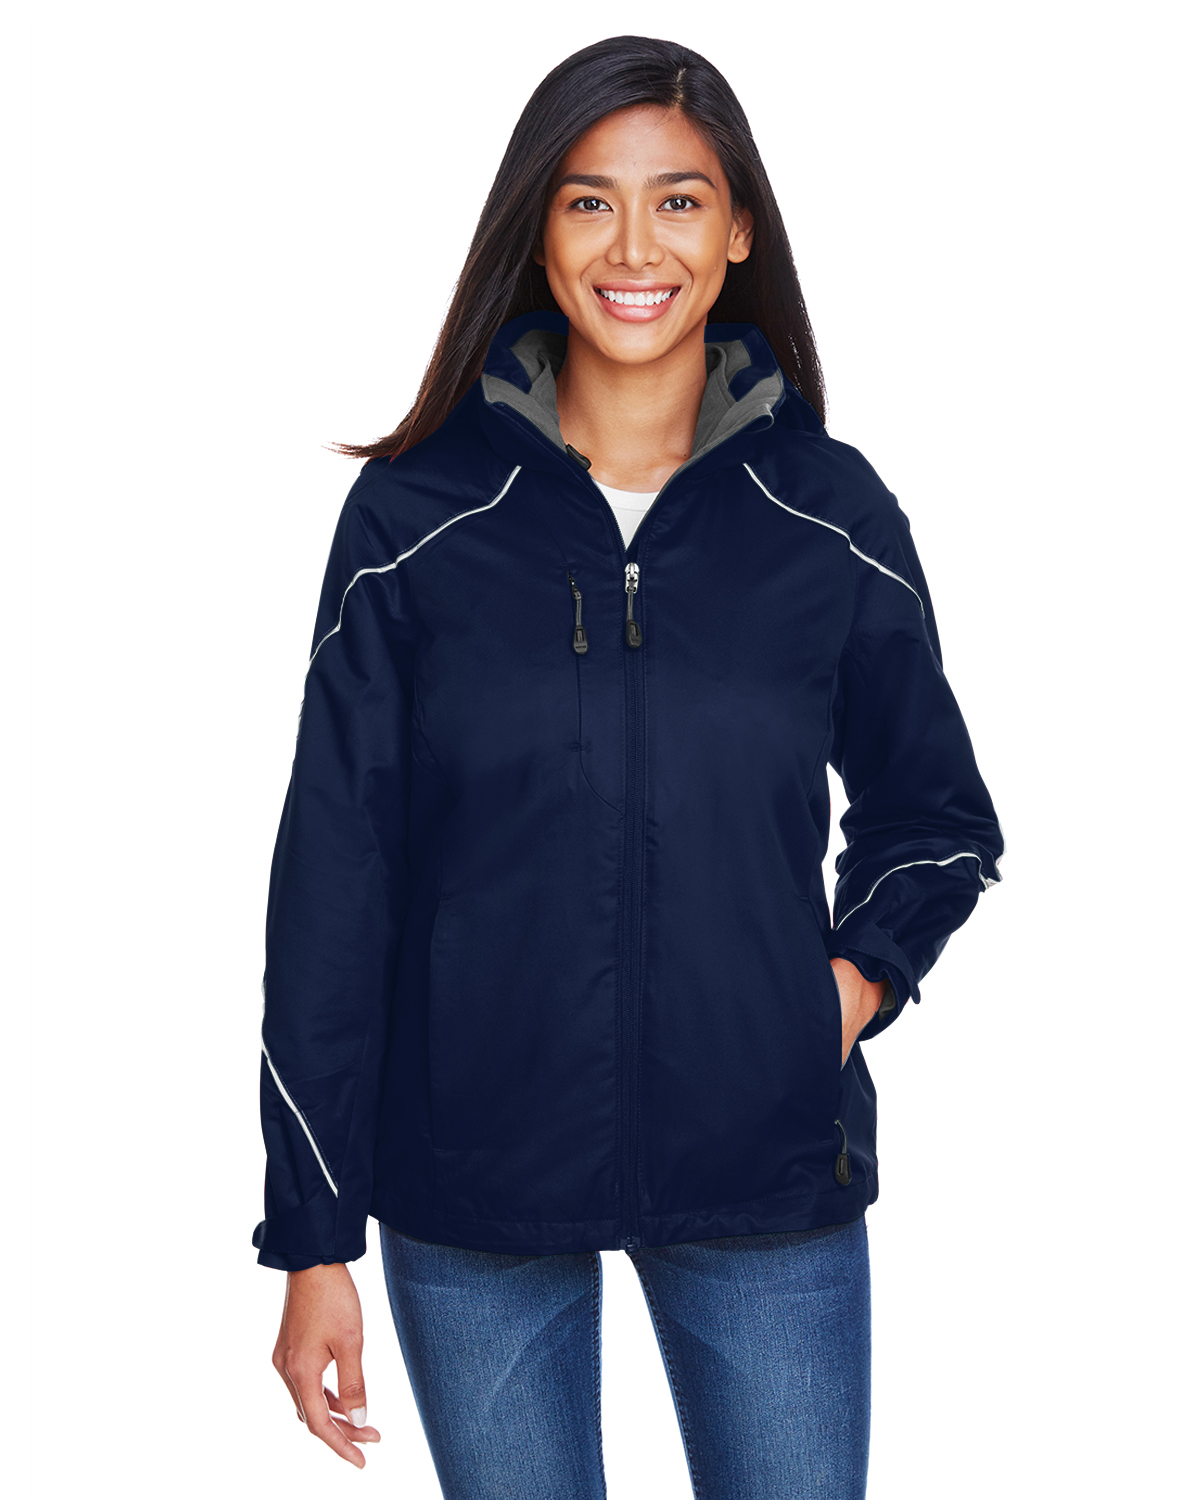 Ladies' Angle 3-in-1 Jacket with Bonded Fleece Liner - NIGHT - XS - image 1 of 3